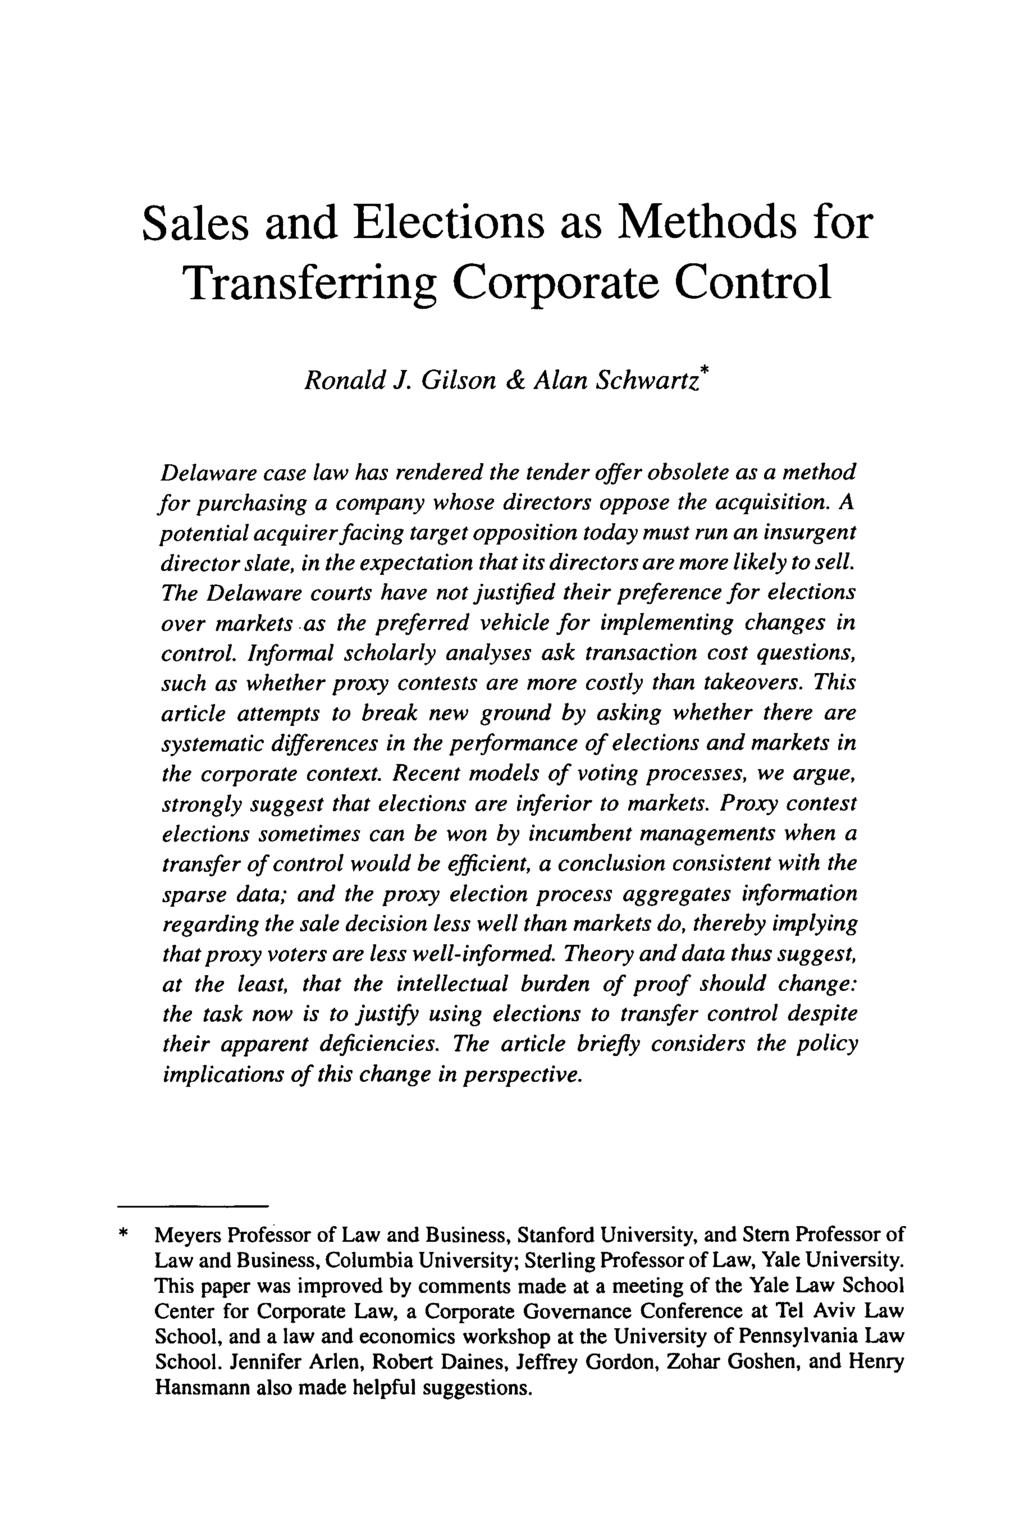 Theoretical Inquiries in Law 2.2 (2001) Sales and Elections as Methods for Transferring Corporate Control Ronald I.